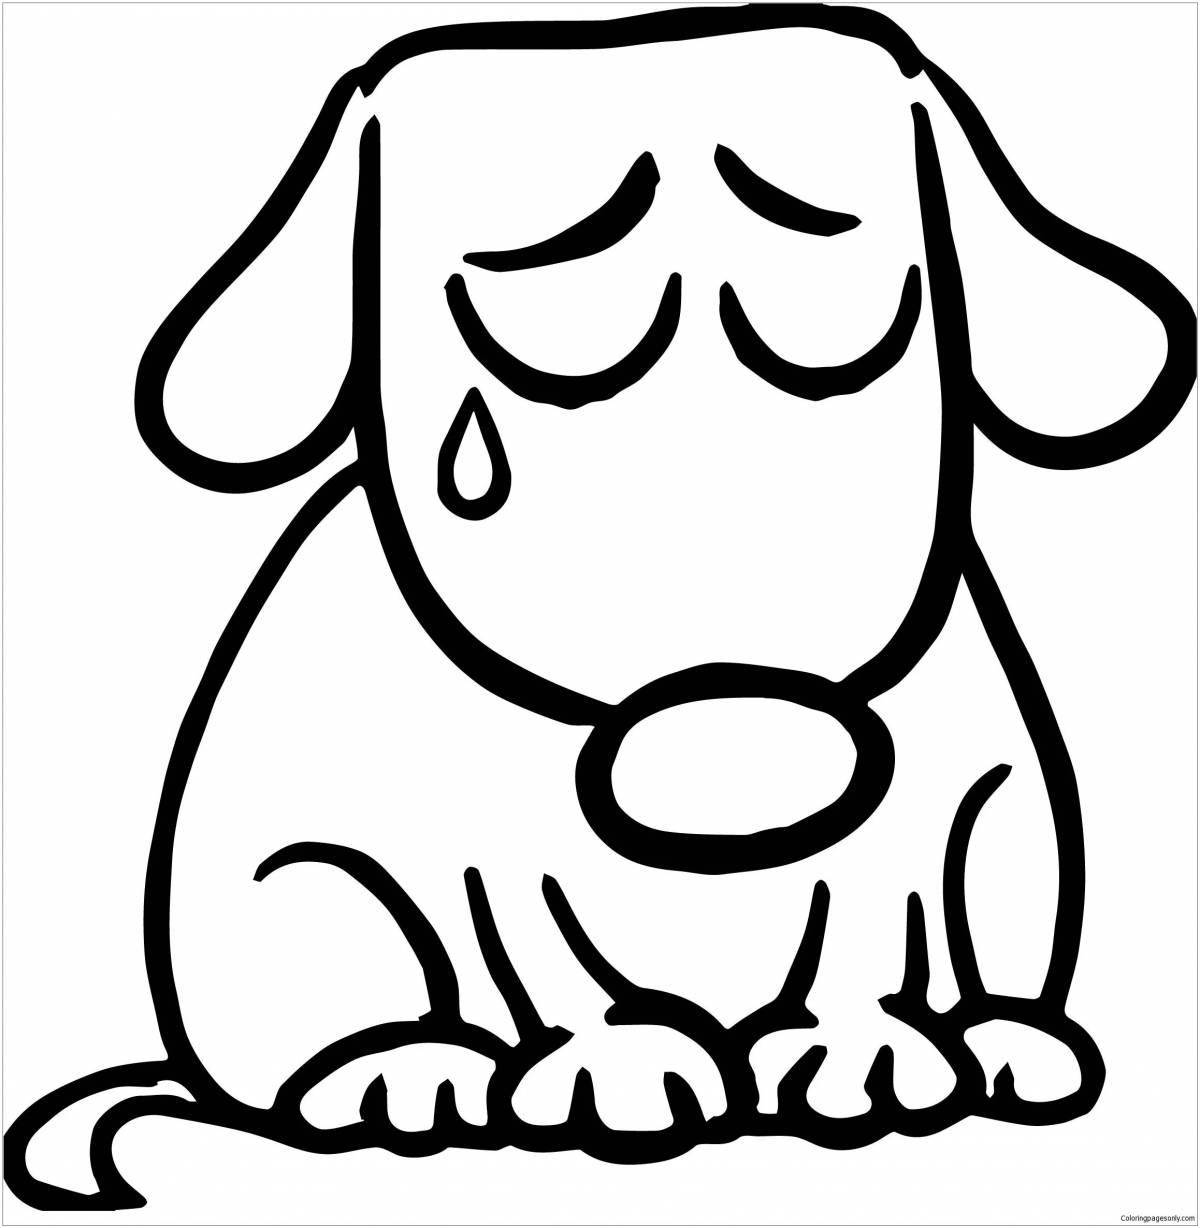 Snuggly coloring page doggy lalafanfan